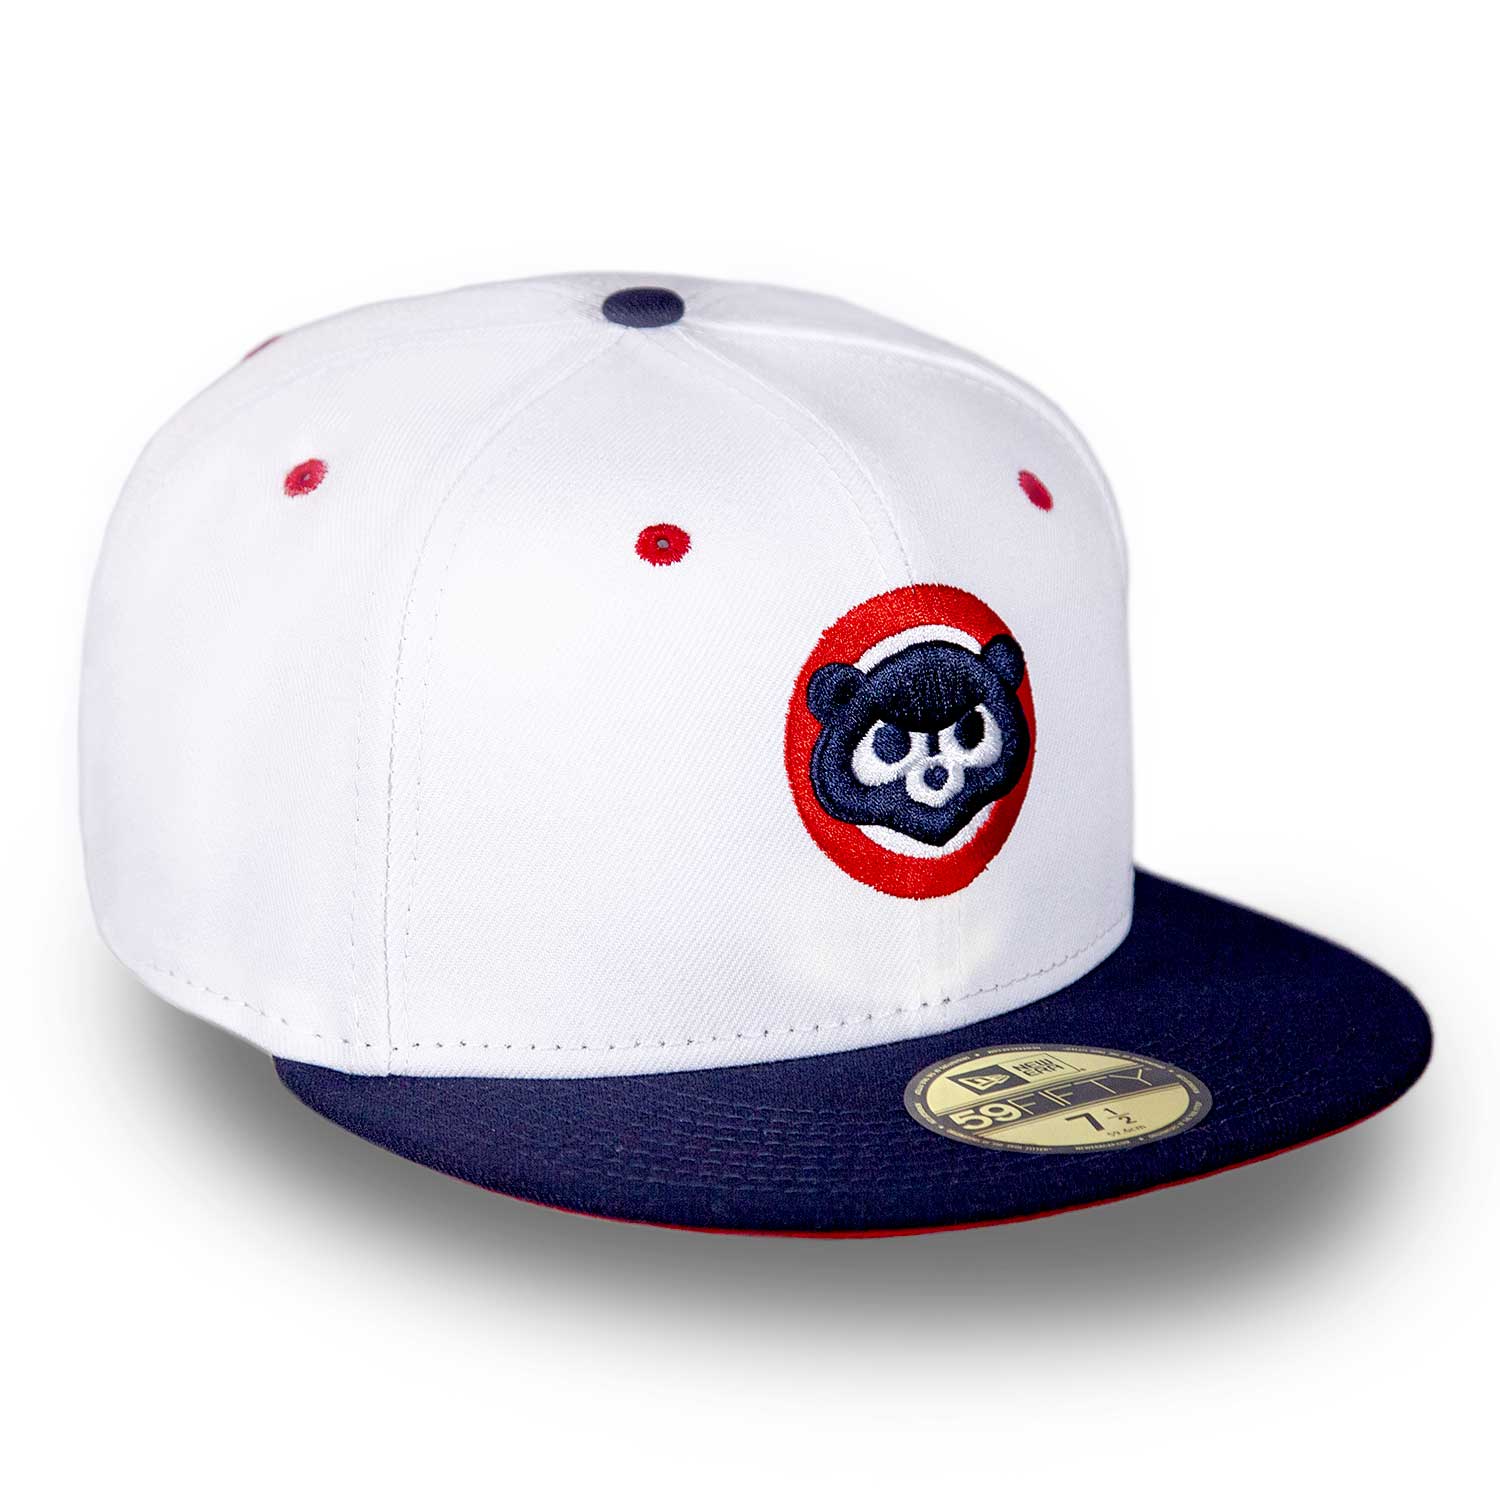 Chicago Cubs 1984 Red White & Blue 59FIFTY Fitted Cap 7 3/8 = 23 1/8 in = 58.7 cm